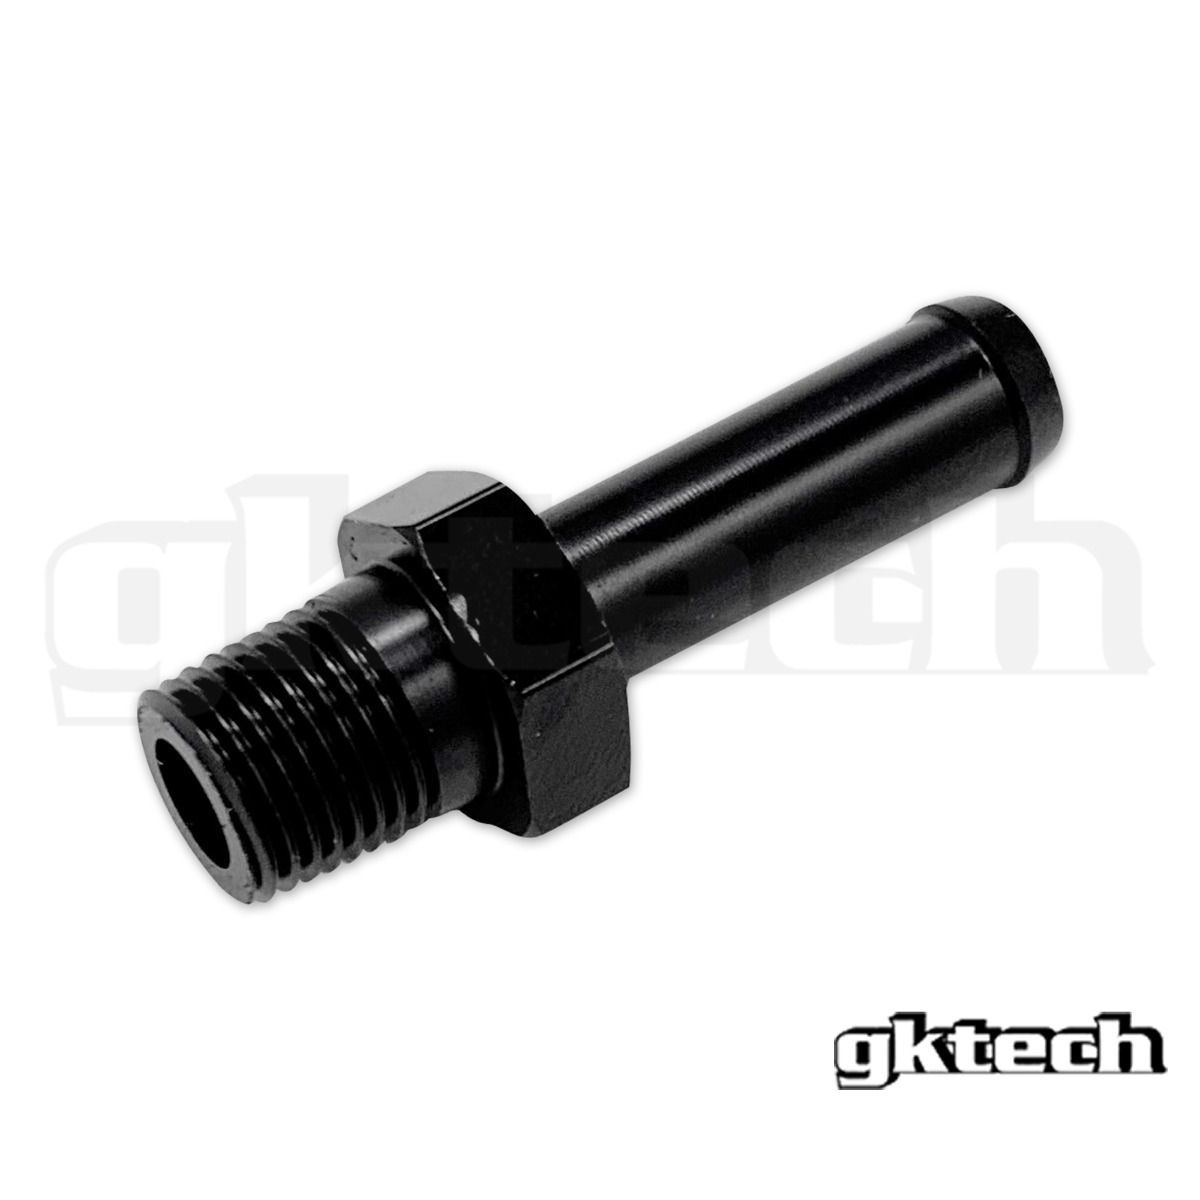 GKTech 1/8-27 NPT TO 8MM Barb